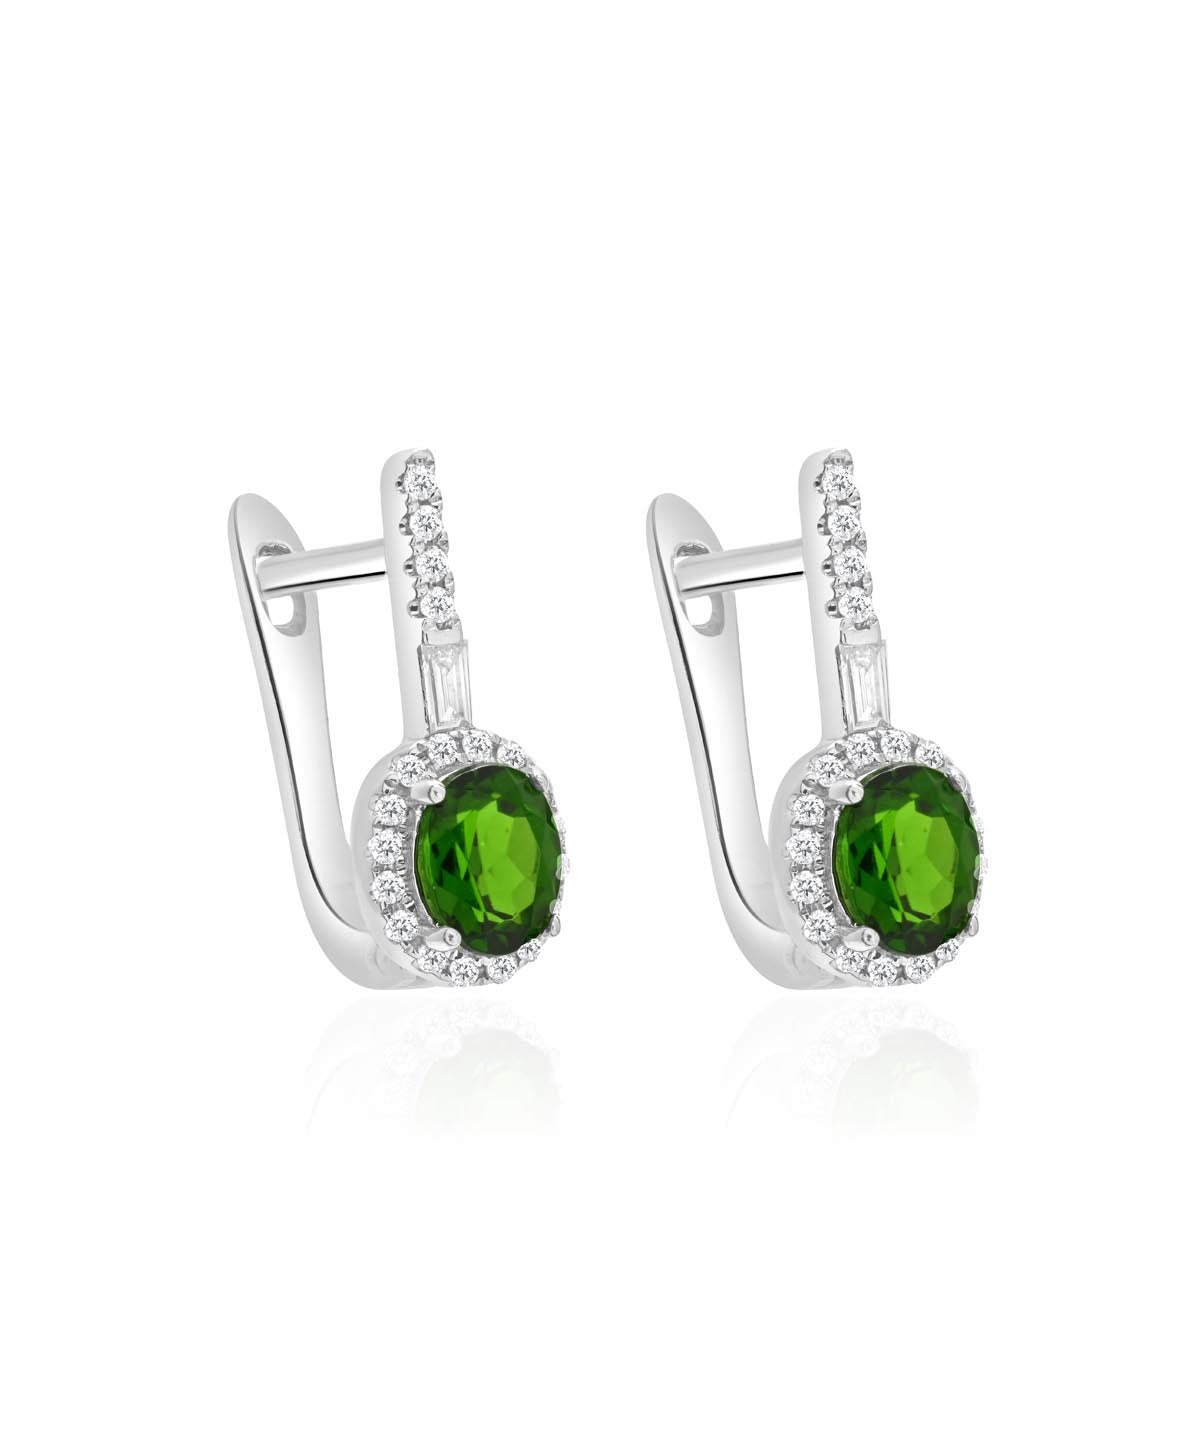 14K White Gold Russalite and Diamond Halo Earrings